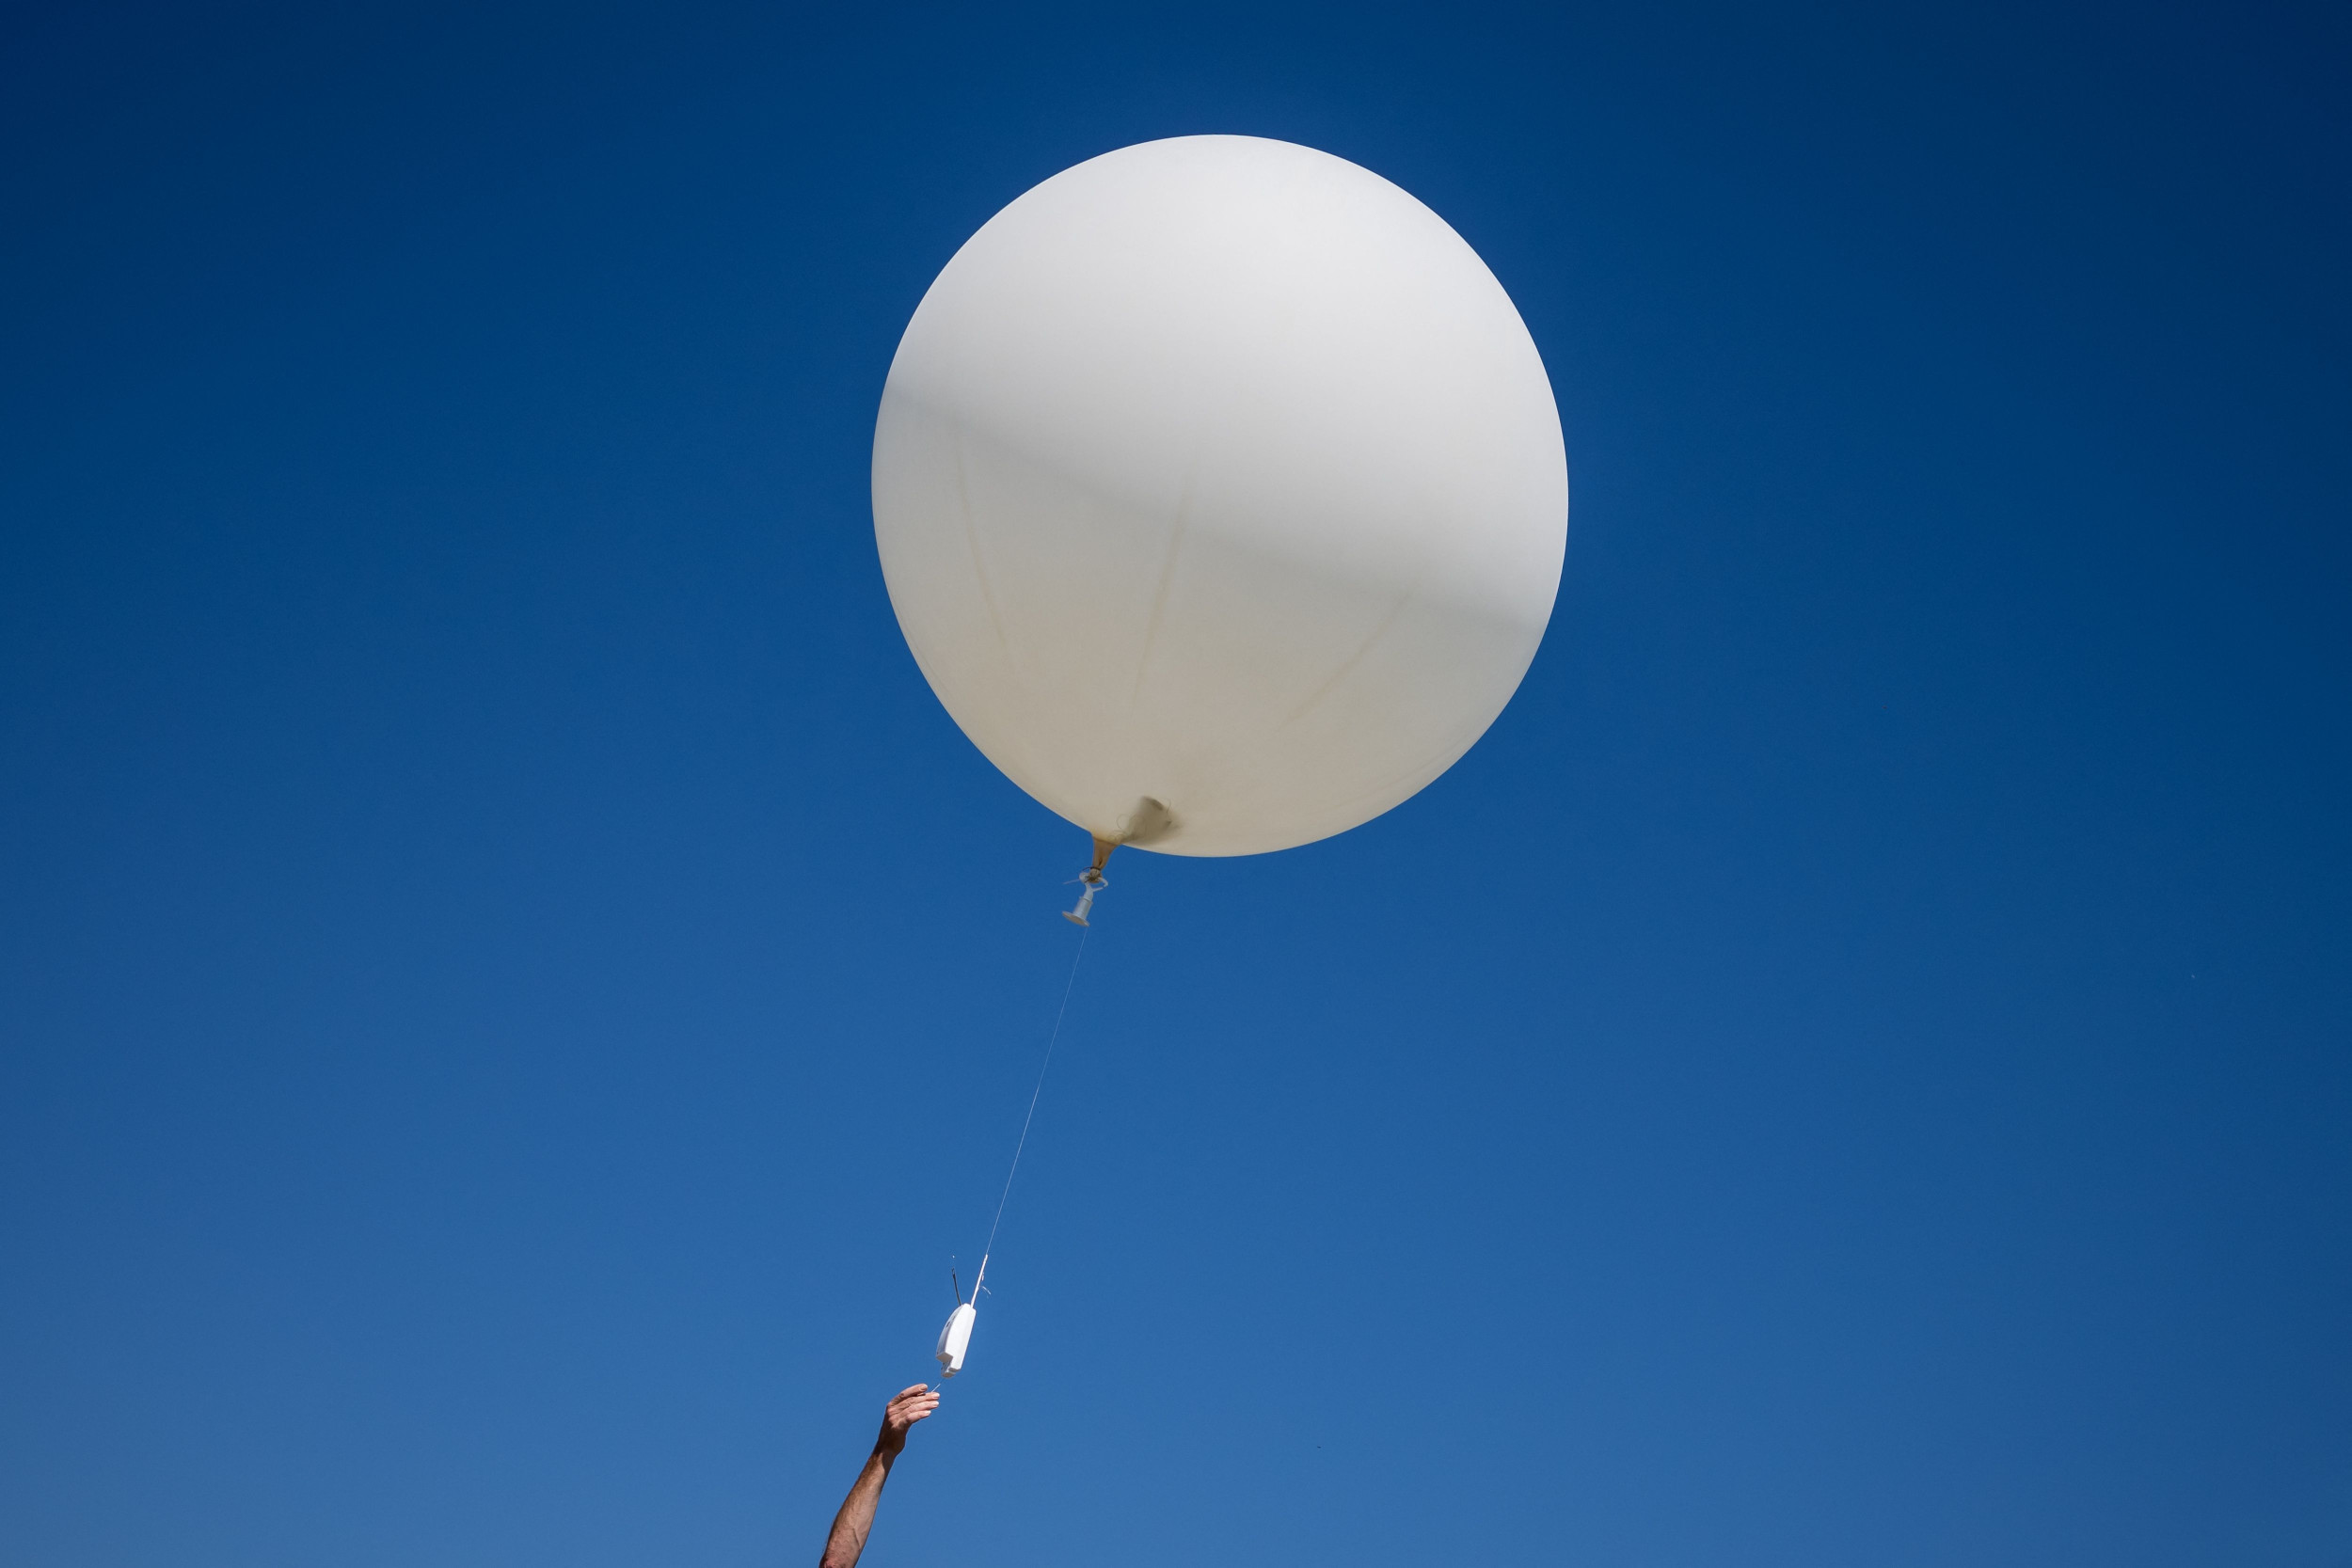 more details about china's high-altitude balloon campaign revealed